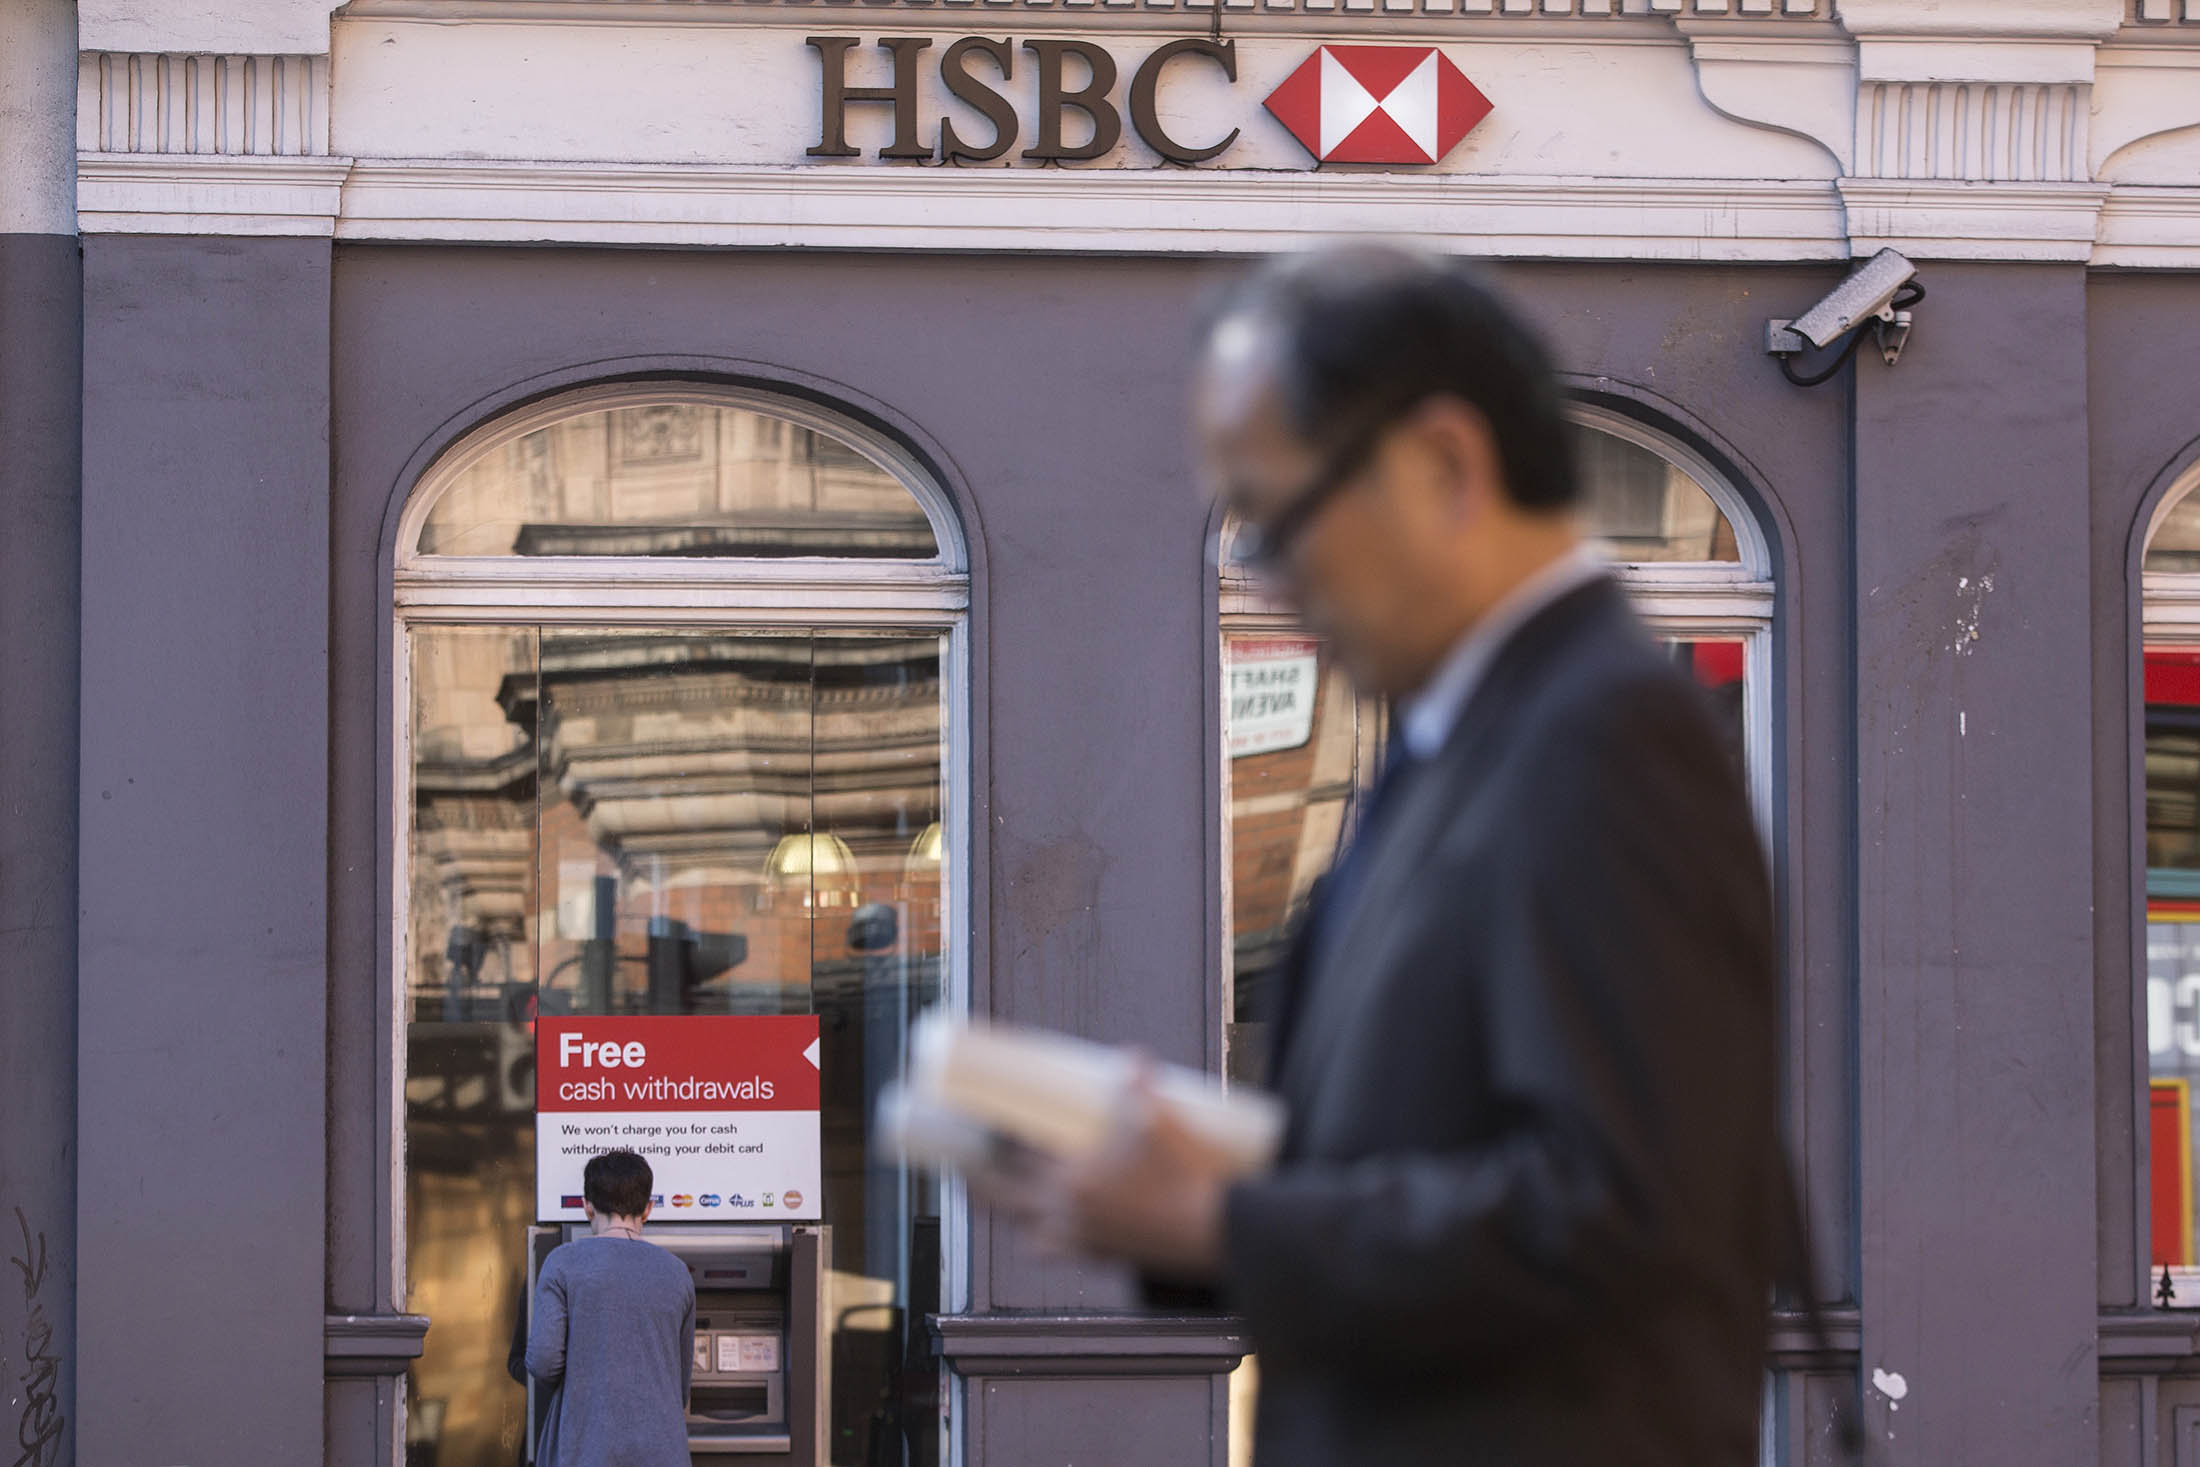 HSBC Holdings Plc Bank Branches As Company Announces Plans To Eliminate 50,000 Jobs